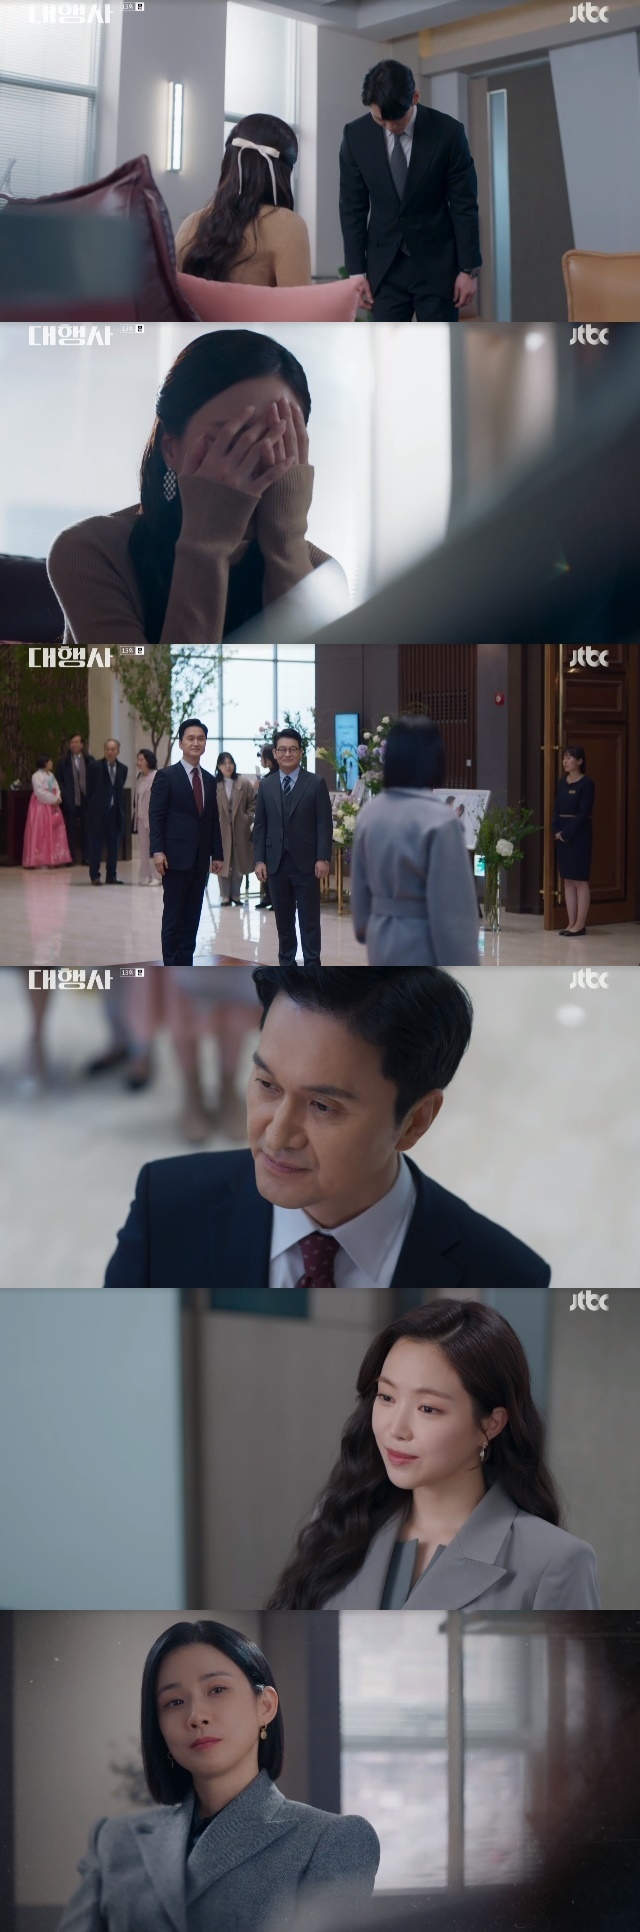 The strategic alliance between Lee Bo-young and Son Na-eun, who each lost someone they trusted, was heralded.In the 13th JTBC Saturday drama an agency (playwright Song Soo-han, director Lee Chang-min), which was broadcast on February 18th, Kang Han-Na (Son Na-eun) who breaks up with Park Yung-woo (Han Joon-woo) Lee Bo-young, who is in the back of his head, was portrayed.On this day, Park Yung-woo received a proposal to give Kang Han-Na and strong water (Cho Bok-rae), who is fighting for the position of vice chairman, to give Kang Han-Na a cash of 300 billion won and a 100% stake in the company that manages affiliate buildings.Park Yung-woo decided to leave Kang Han-Nas side in order not to block Kang Han-Nas future.Kang Han-Na described Park Yung-woo as If you go like this, you will not see forever. Without spurs, there is no one on my side in the world.Park Yung-woo is the only person I can trust 100%. Park Yung-woo said, If I stay like this, I can take away everything I have. Kang Han-Nas weakness if she is by her side is that she can not take the vice chairman position she wants.Kang Han-Na said, I hope youve learned a lot this time. Some relationships dont create synergy if you mix them up, and couldnt hold Park Yung-woo firmly back.On the other hand, choi chang-soo (Jo Sung-ha) moved diligently to attack the orphan. He first approached the prosecutor who had a regret to the orphan as a jewel of Woo-Won Group chairman and appealed as enemy enemy comrade. Choi Chang-soo promised that the prosecutor would be a speaker for all employees to know in exchange for informing him of useful information.Choi Chang-soo also made Jang Hyun-sung, a senior who believed and relied on the orphans, on his side.Choi Chang-soo went to the store after hearing that Yoo Jung-seoks daughter was about to attend Wedding ceremony and said, Anyway, the orphan will not increase sales by 50% within six months. So come in.I do not want you to be the next head of production. Choi Chang-soo said to Yoo Jung-seok, who refuses, Will you sit as a dad in this kind of pub in your only daughter Wedding ceremony, or will you sit as an agency agency executive in a big company?If you have the power, your parents will not be able to deal with you. Are you more important than your daughter?  I will keep my first promise to you. Ko Sang-moo is a college professor and you are not bad with the next production director. Yoo Jung-seok, who eventually fell to choi chang-soo, betrayed the orphan.The orphanage, who presented a wedding dress to the daughter of Yoo Jung-seok, made a lot of money, and expressed his heartfelt gratitude to him as if he was almost gone, said, Congratulations to Yoo Jung-seoks daughter, Wedding ceremony I was surprised to see a lot of wreaths coming in.Some of them were sent by choi chang-soo. Yoo Jung-seok appeared in front of these orphans, shaking hands with choi chang-soo, which gave him a bigger shock.